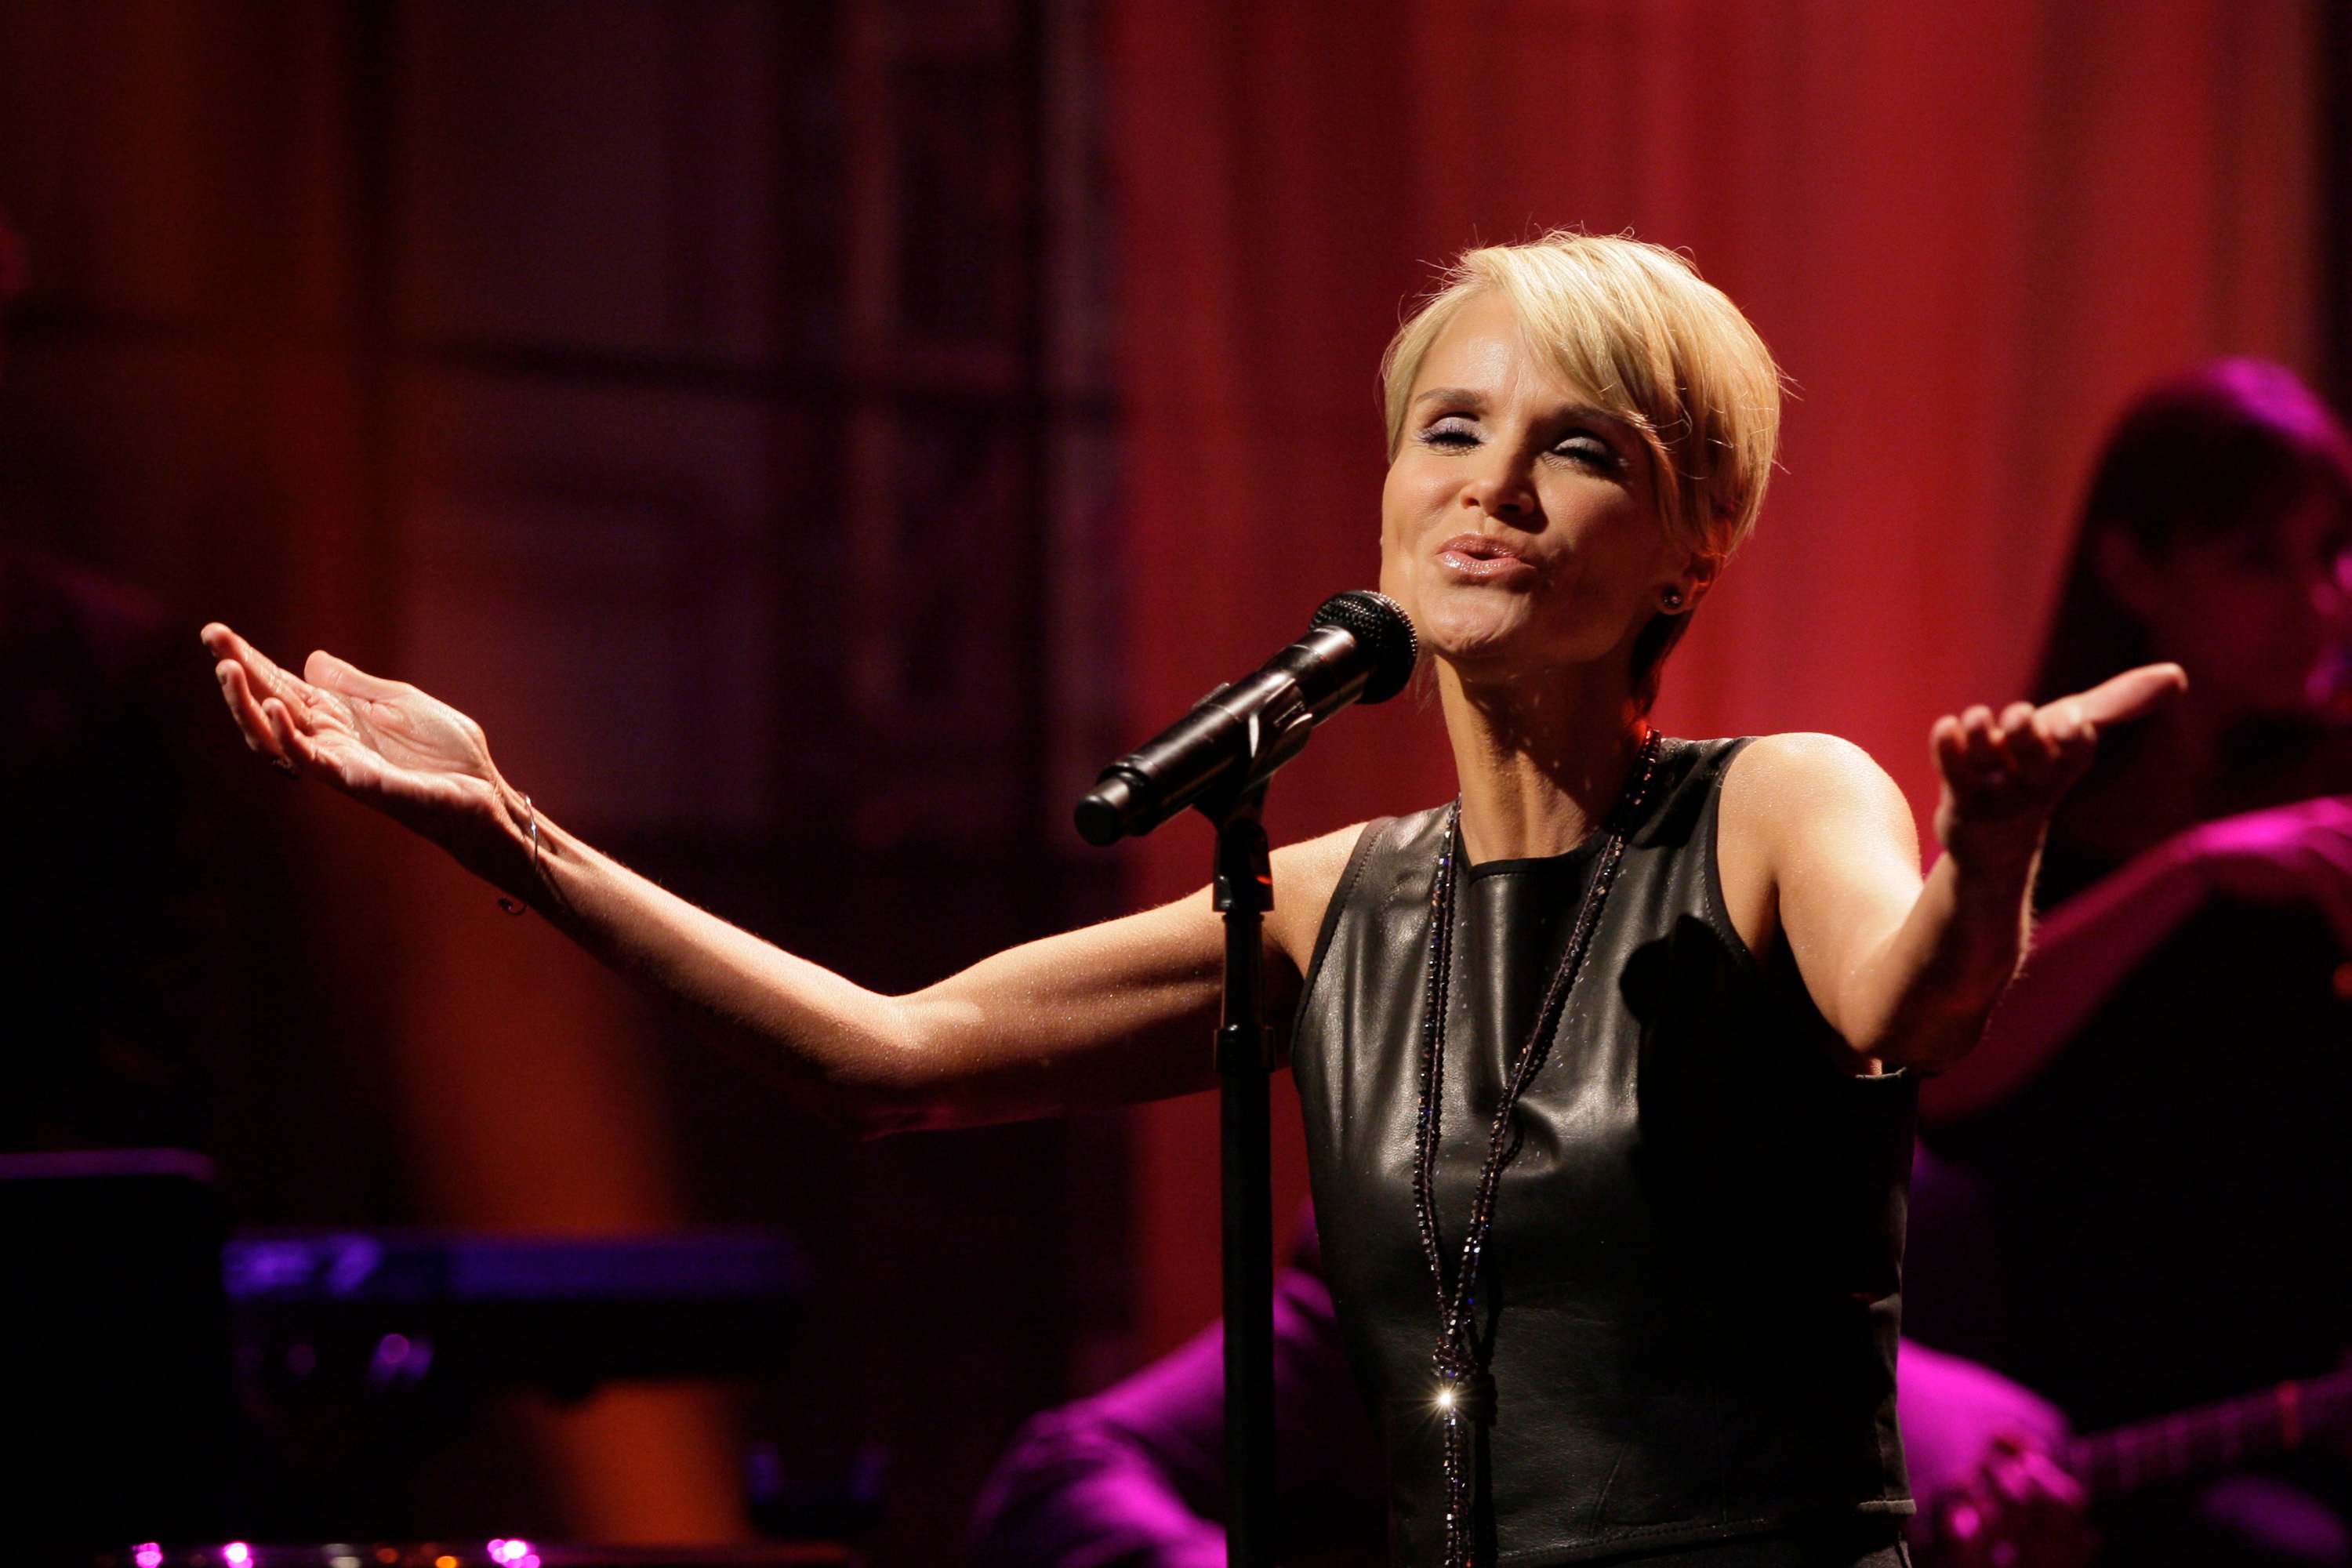 Kristen Chenoweth, who has a shocking connection to the Oklahoma girl scout murders, performs on The Tonight Show with Jay Leno in 2014